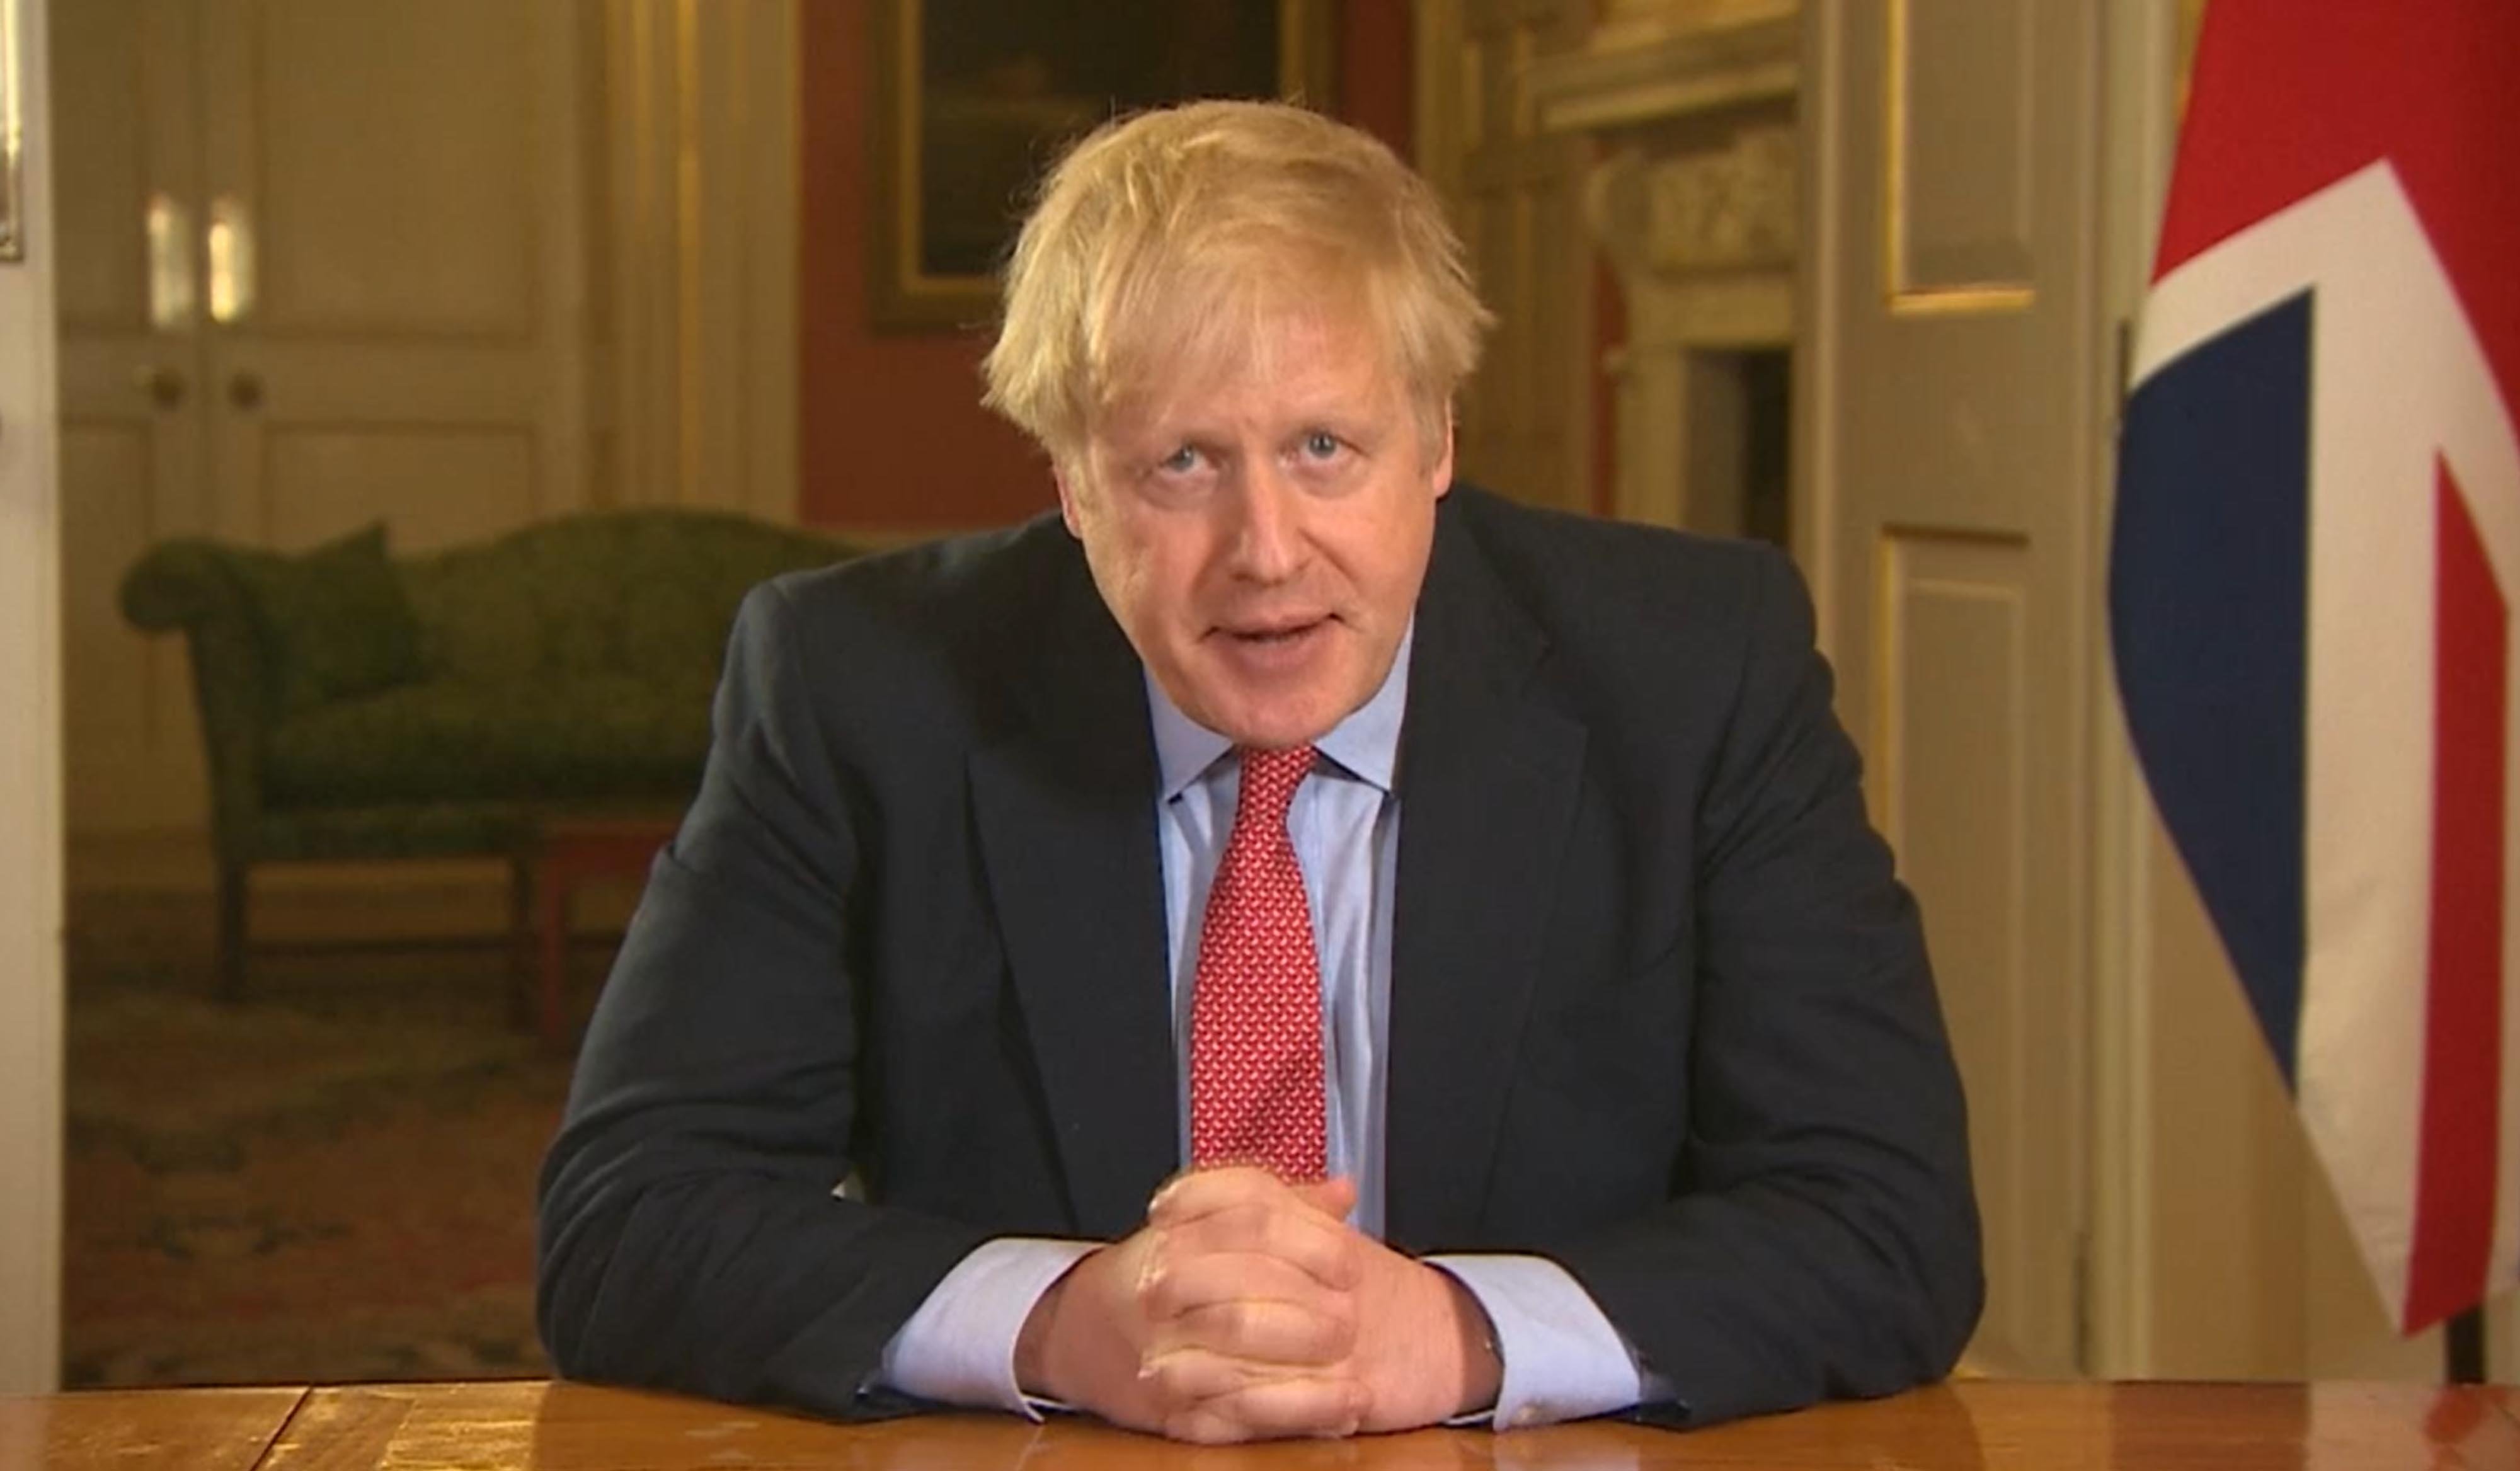 Prime Minister Boris Johnson addressing the nation from 10 Downing Street, London, on March 23, 2020. | Photo: Getty Images